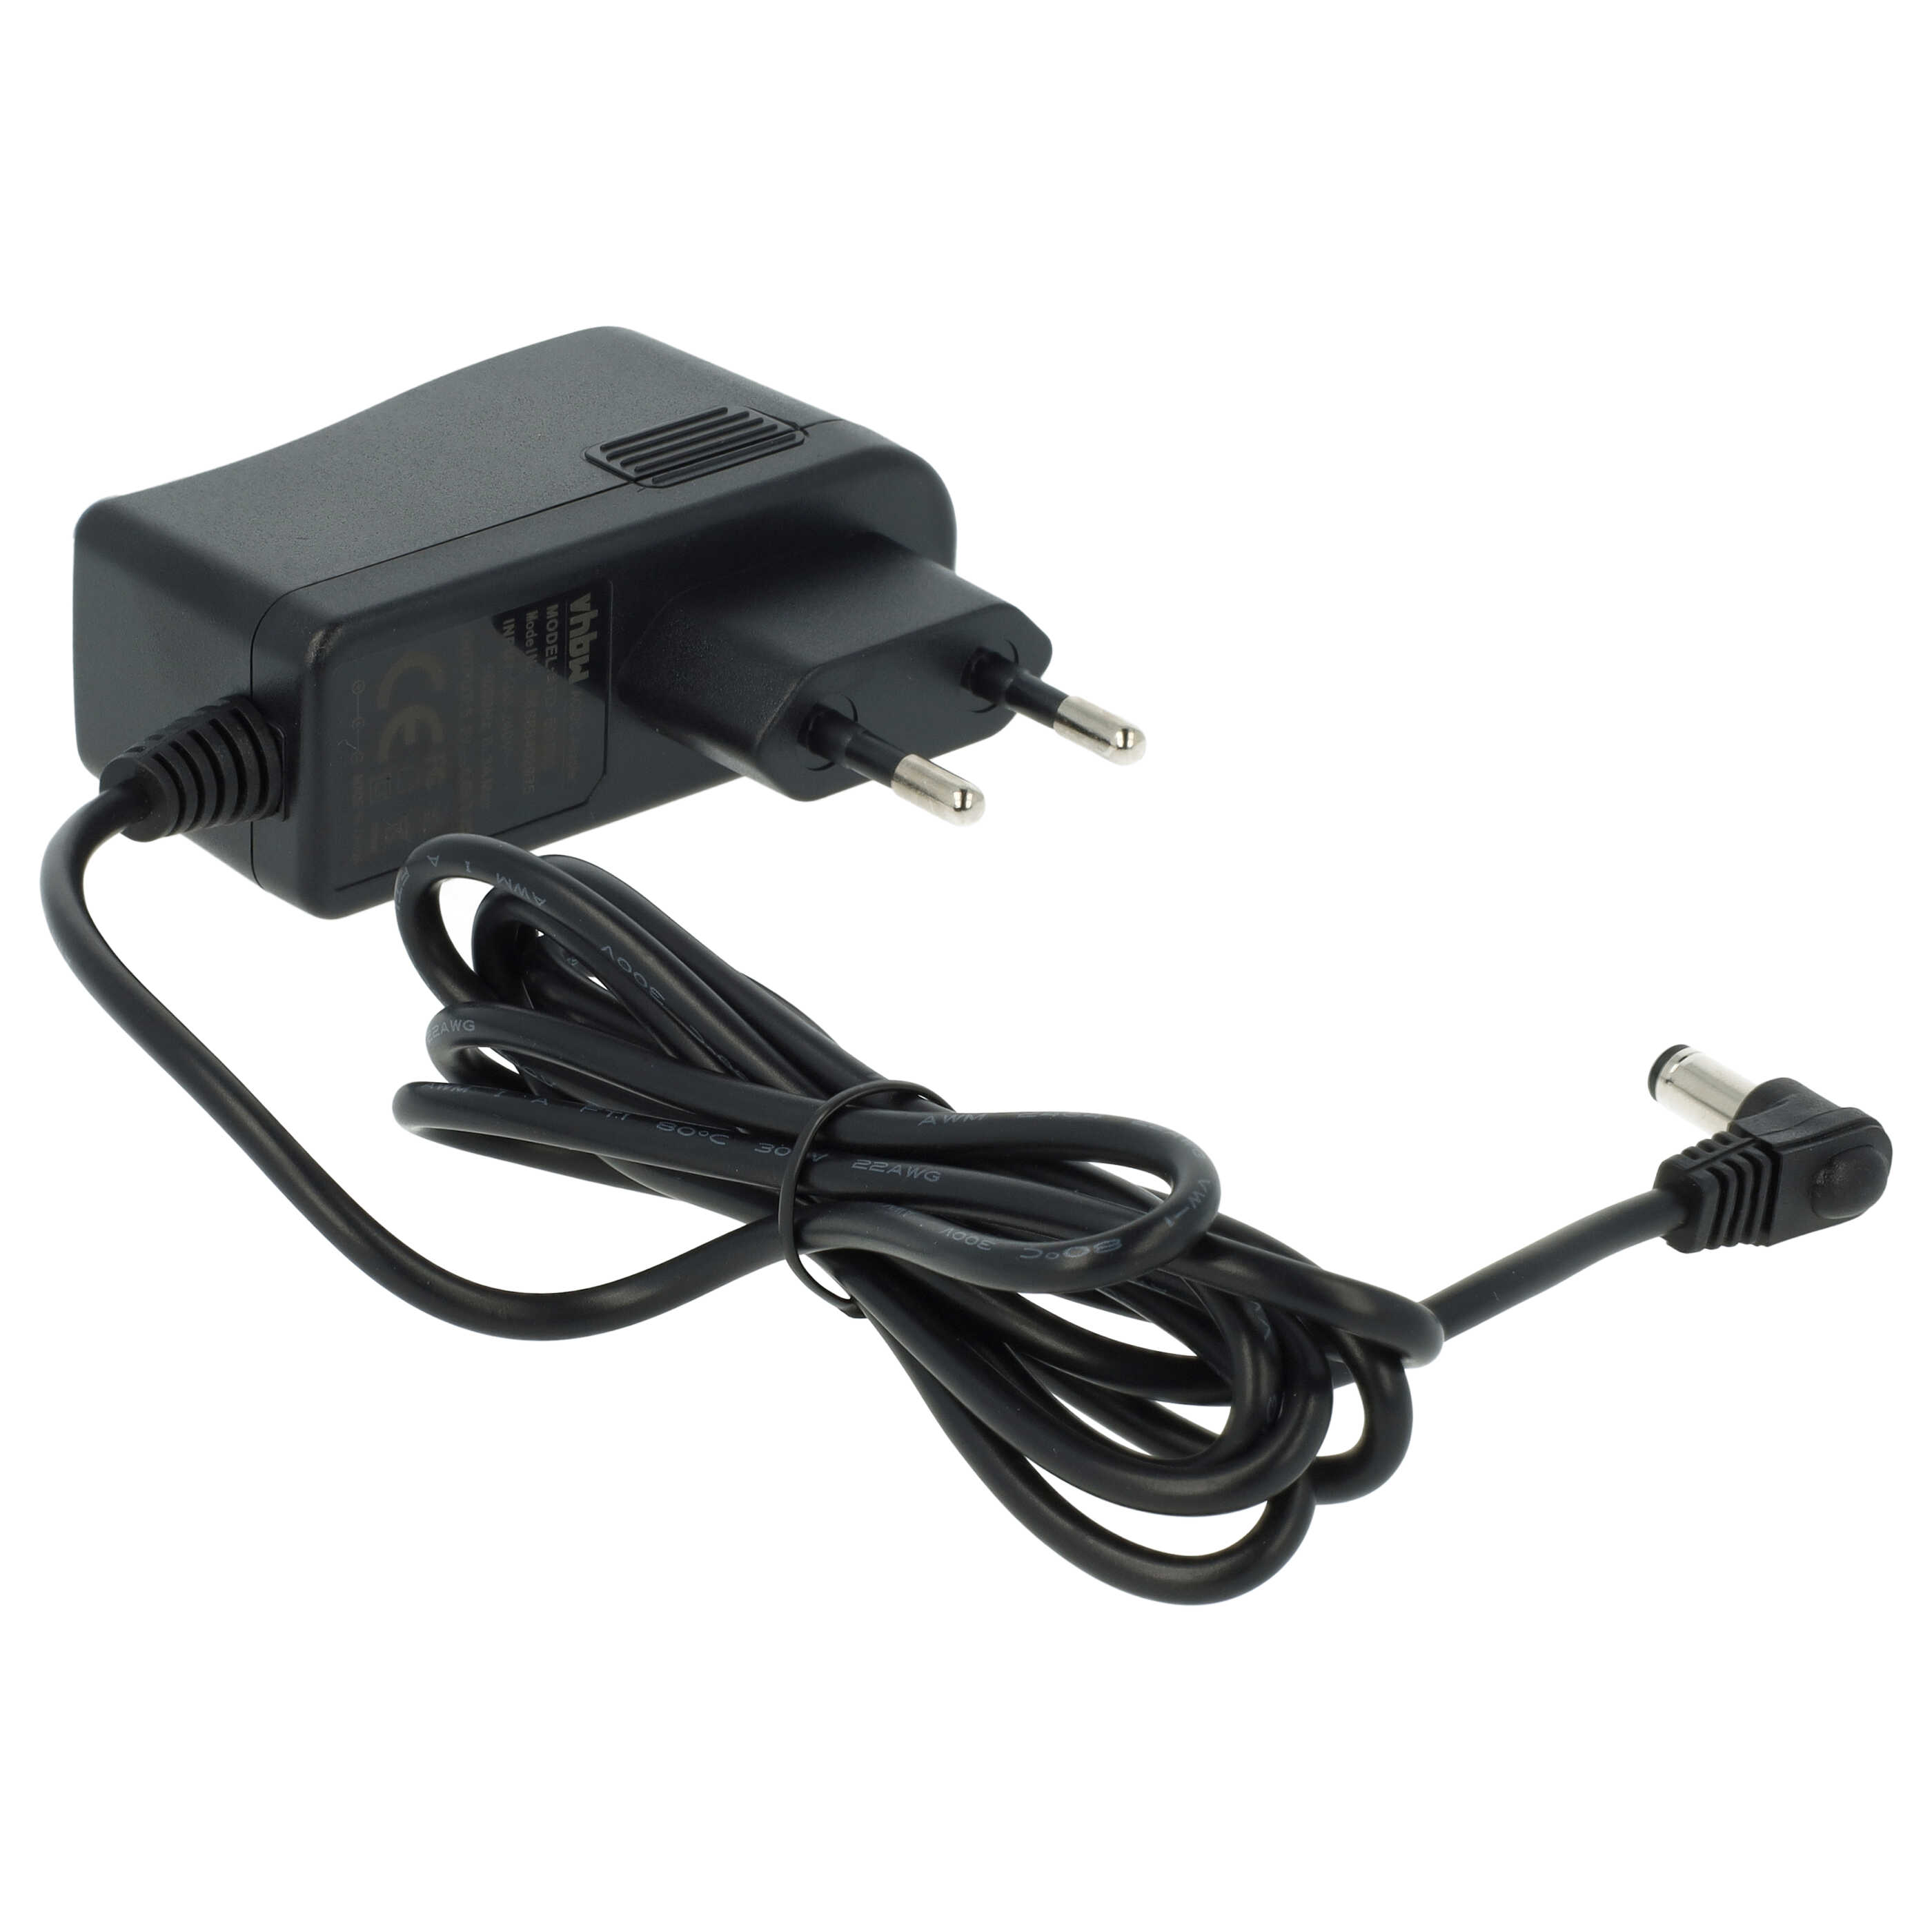 Mains Power Adapter replaces Honeywell 6124 R2JK-5650 for Honeywell Barcode Scanner, Handheld POS Scanner